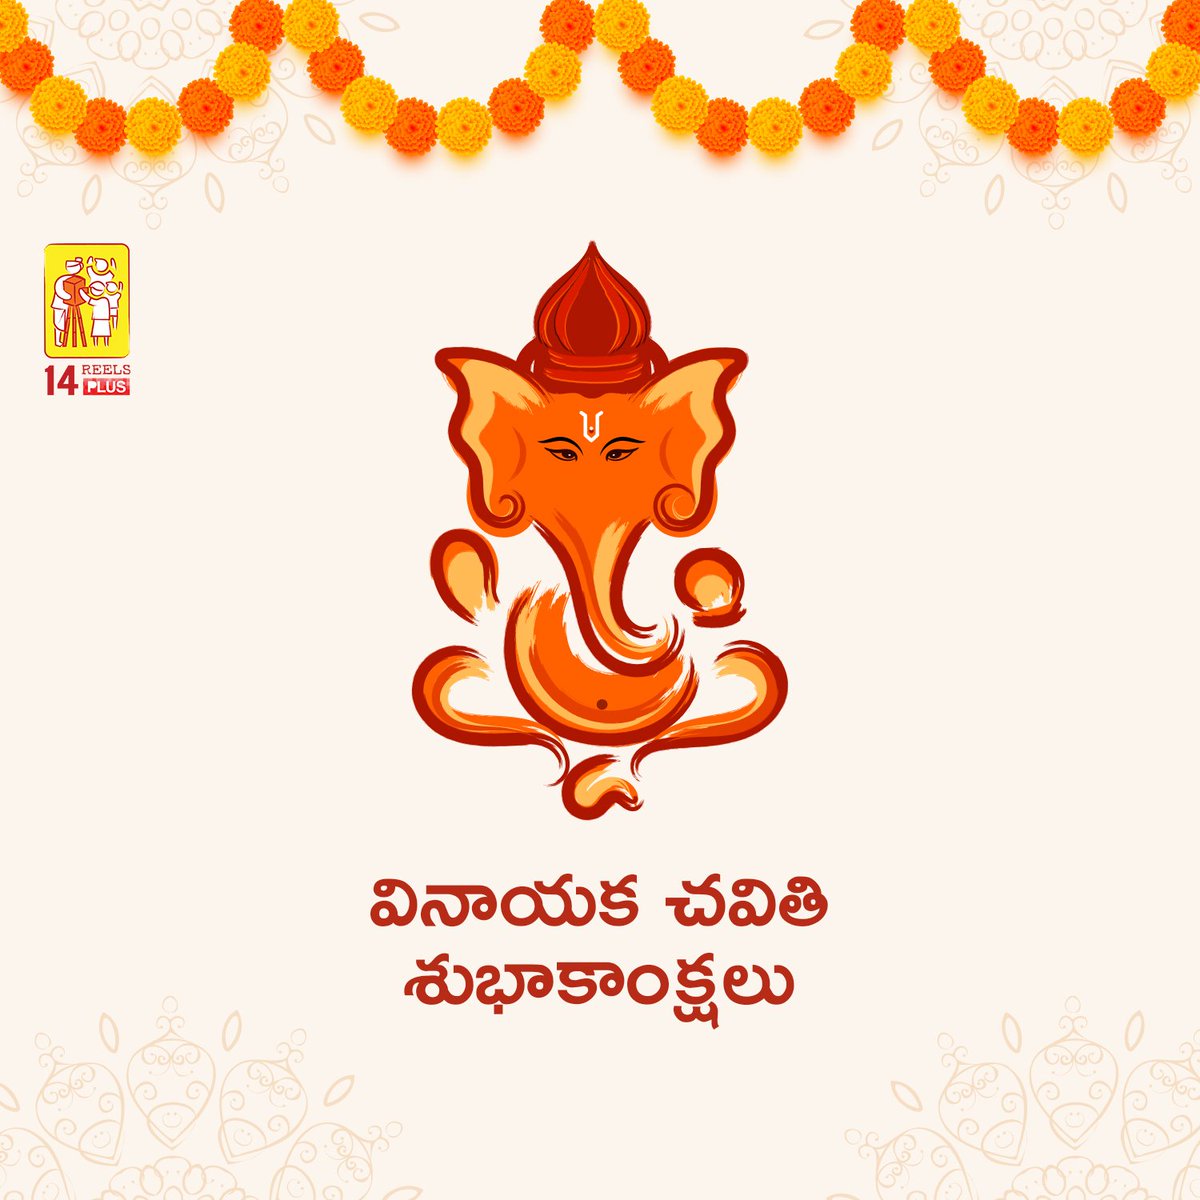 Wishing you all a Happy Vinayaka Chaviti ❤️ May the grace of God keep enlightening your lives and bless you always.